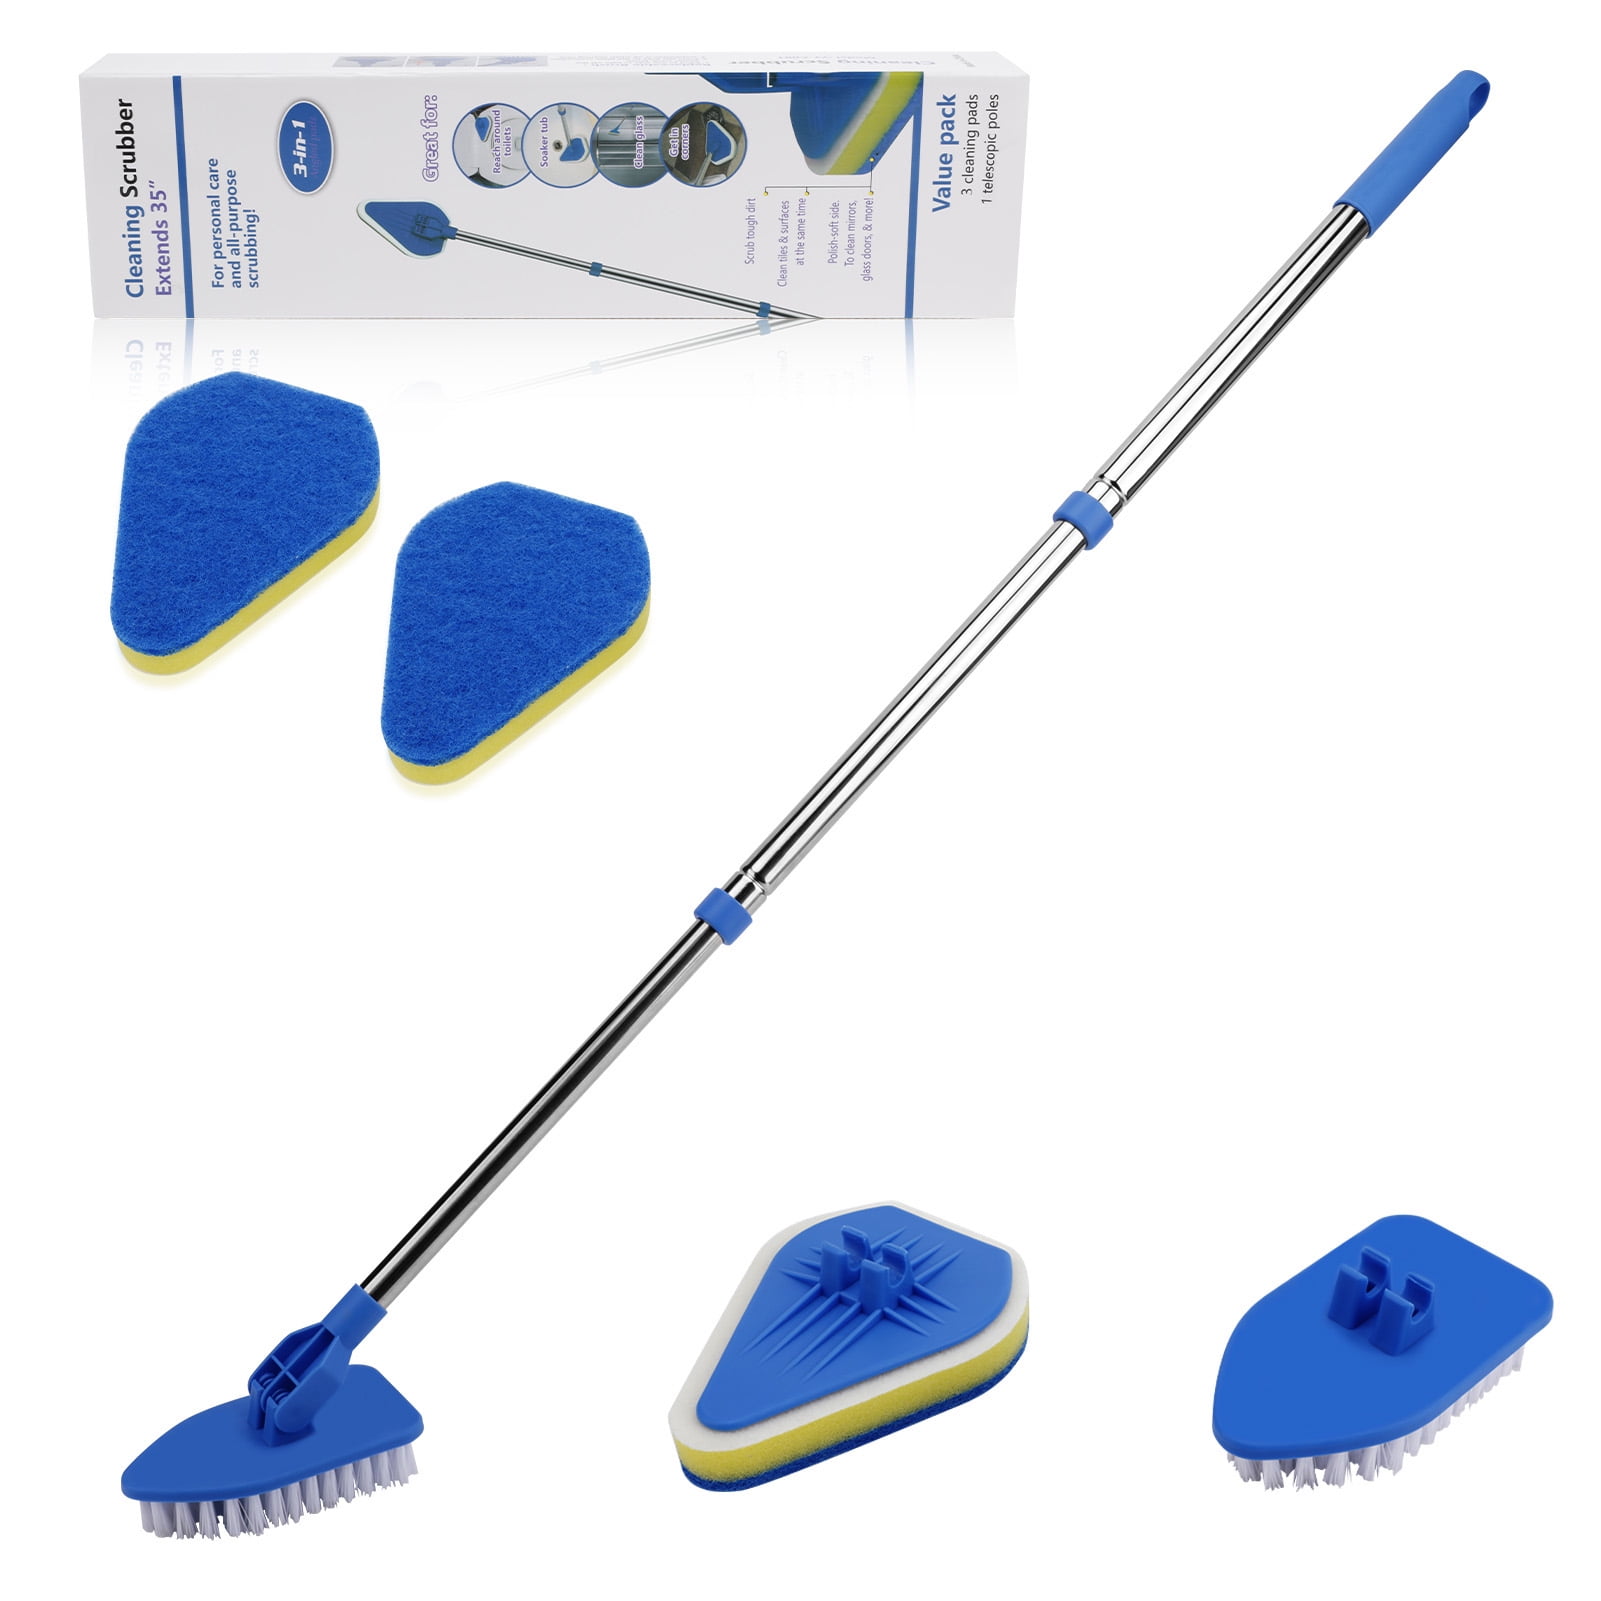 LKHOME 3in 1 Tub Tile Scrubber Brush with Extendable Long Handle, Shower  Cleaning Brush with Detachable Stiff Bristles Shower Wall Scrubber for